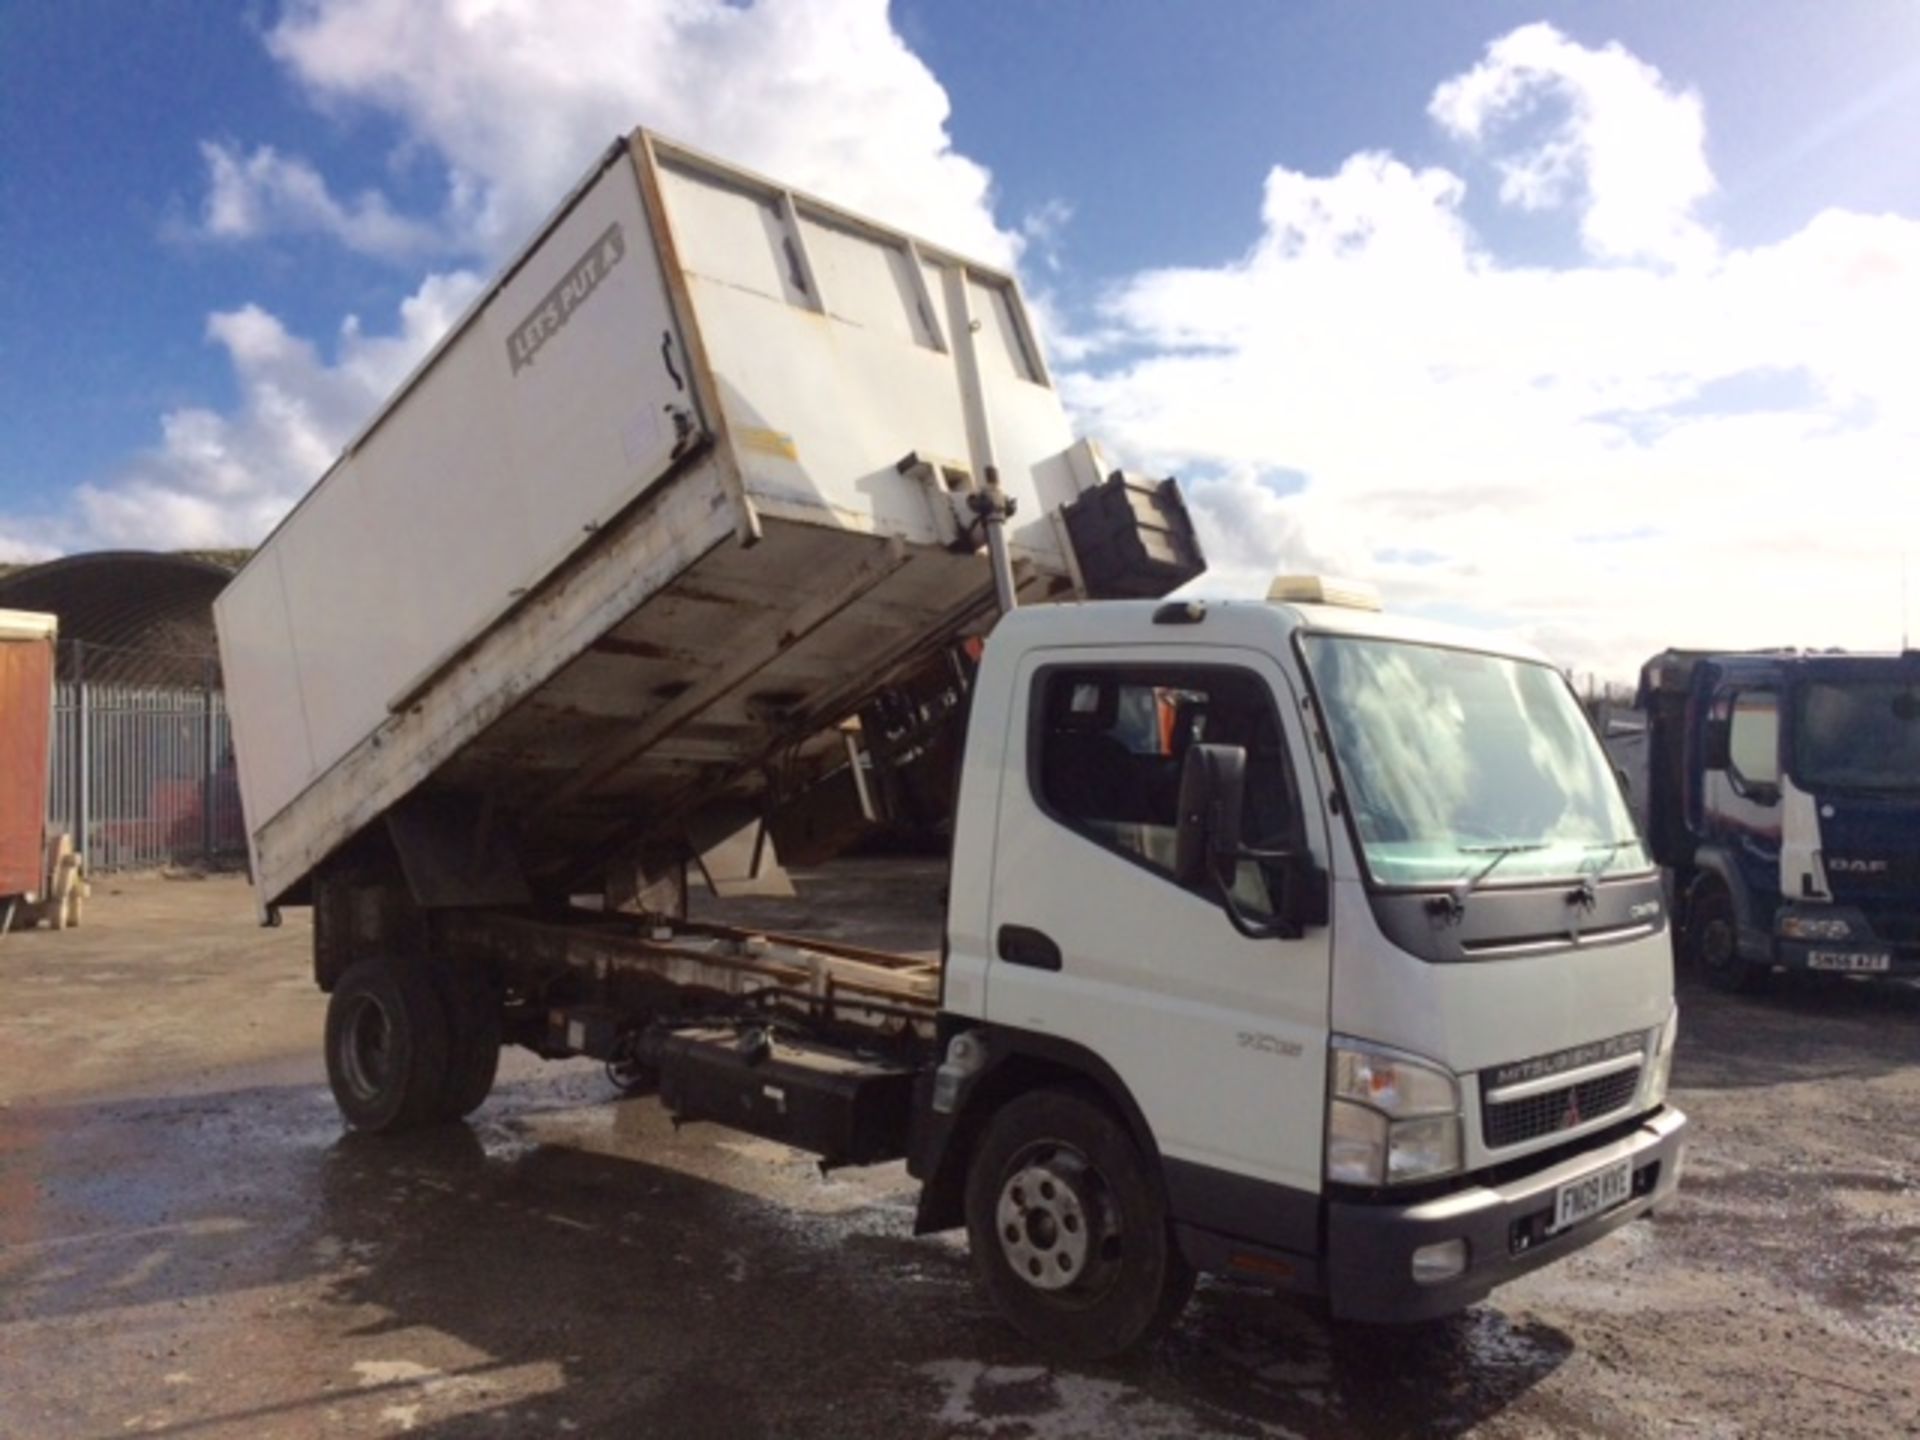 2009 Mitsubishi Canter 7C15 recycling Truck - Image 3 of 5